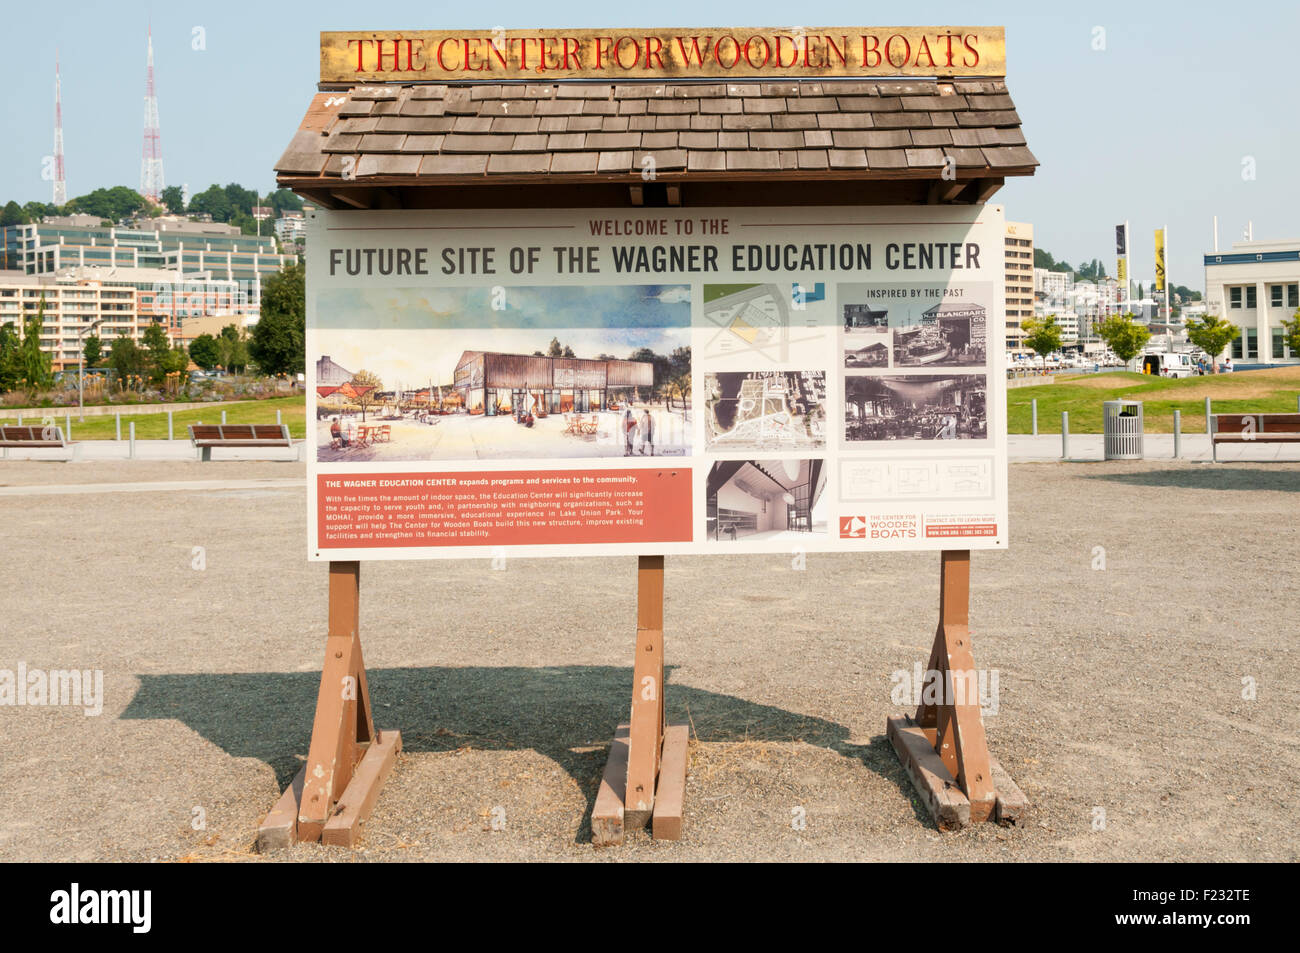 Details at The Center for Wooden Boats on South Lake Union in Seattle concerning the development of the Wagner Education Center. Stock Photo